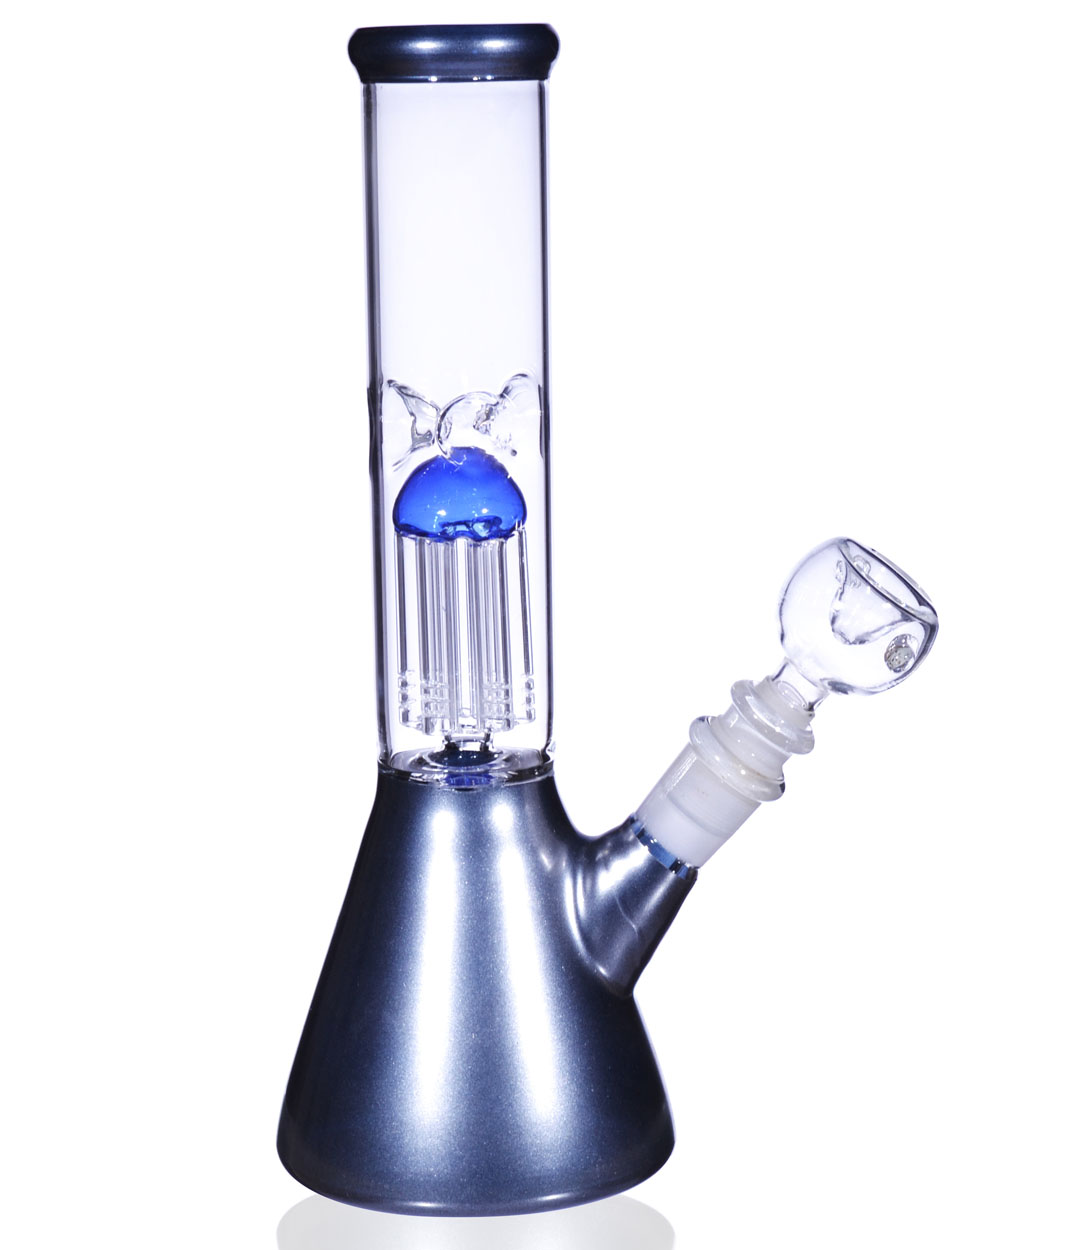 Grey 10" Slotted 6 Arm Tree Bong Water Pipe ThickUSADownstem and bowl